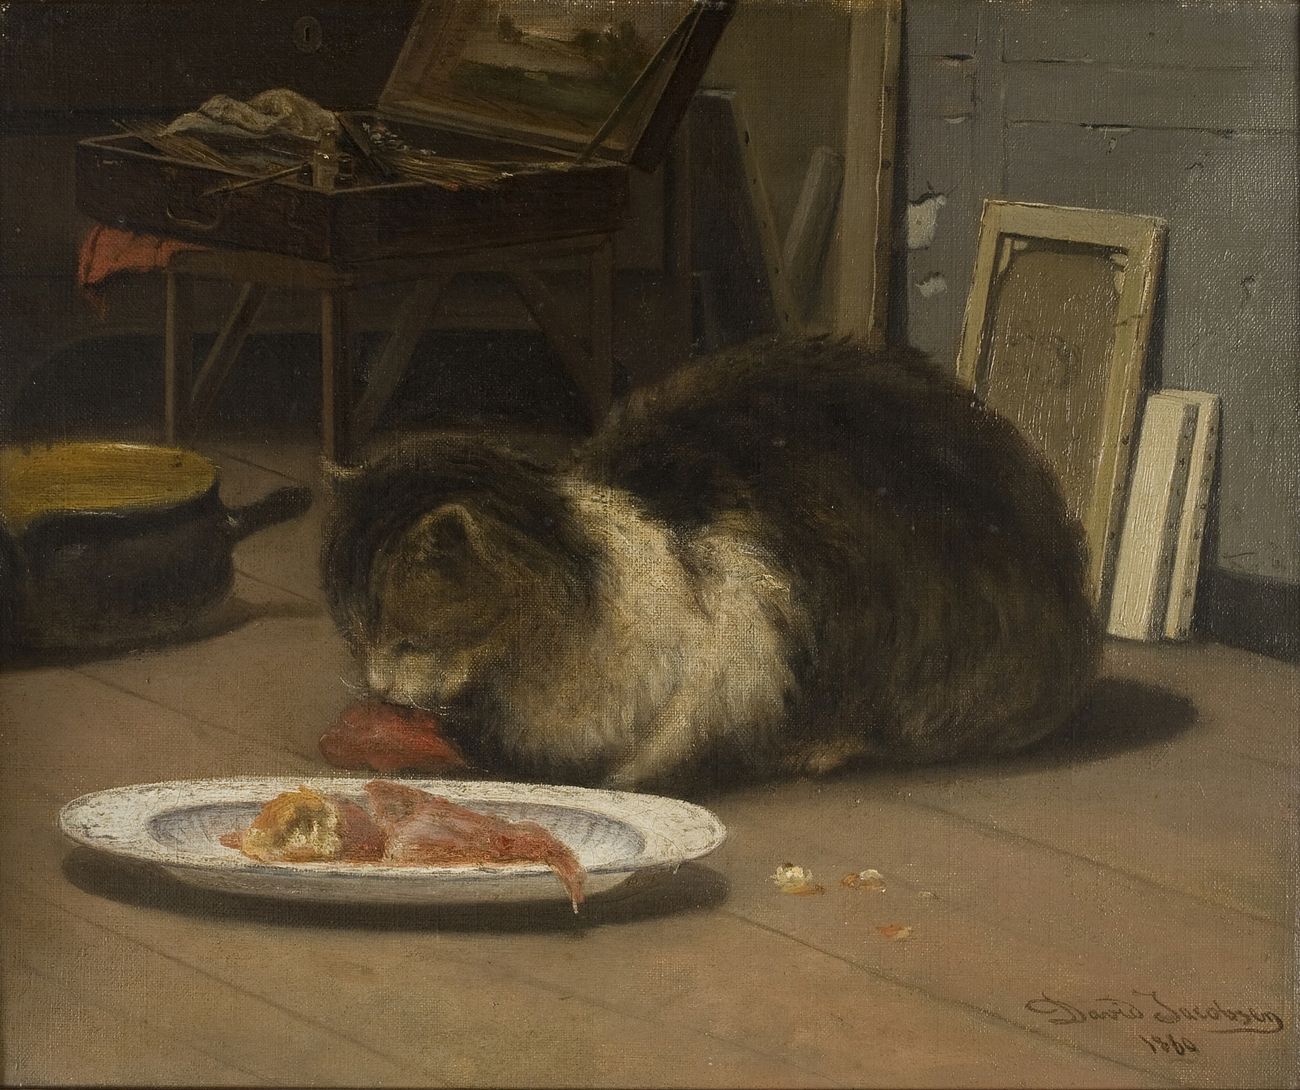 Painting of a cat eating flesh on a white plate